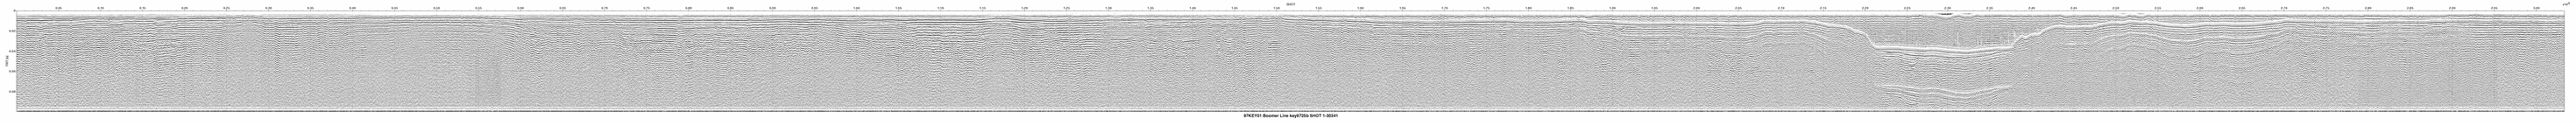 Thumbnail GIF image of the seismic trackline key9725b, with a hotlink to the more detailed, larger JPG image.